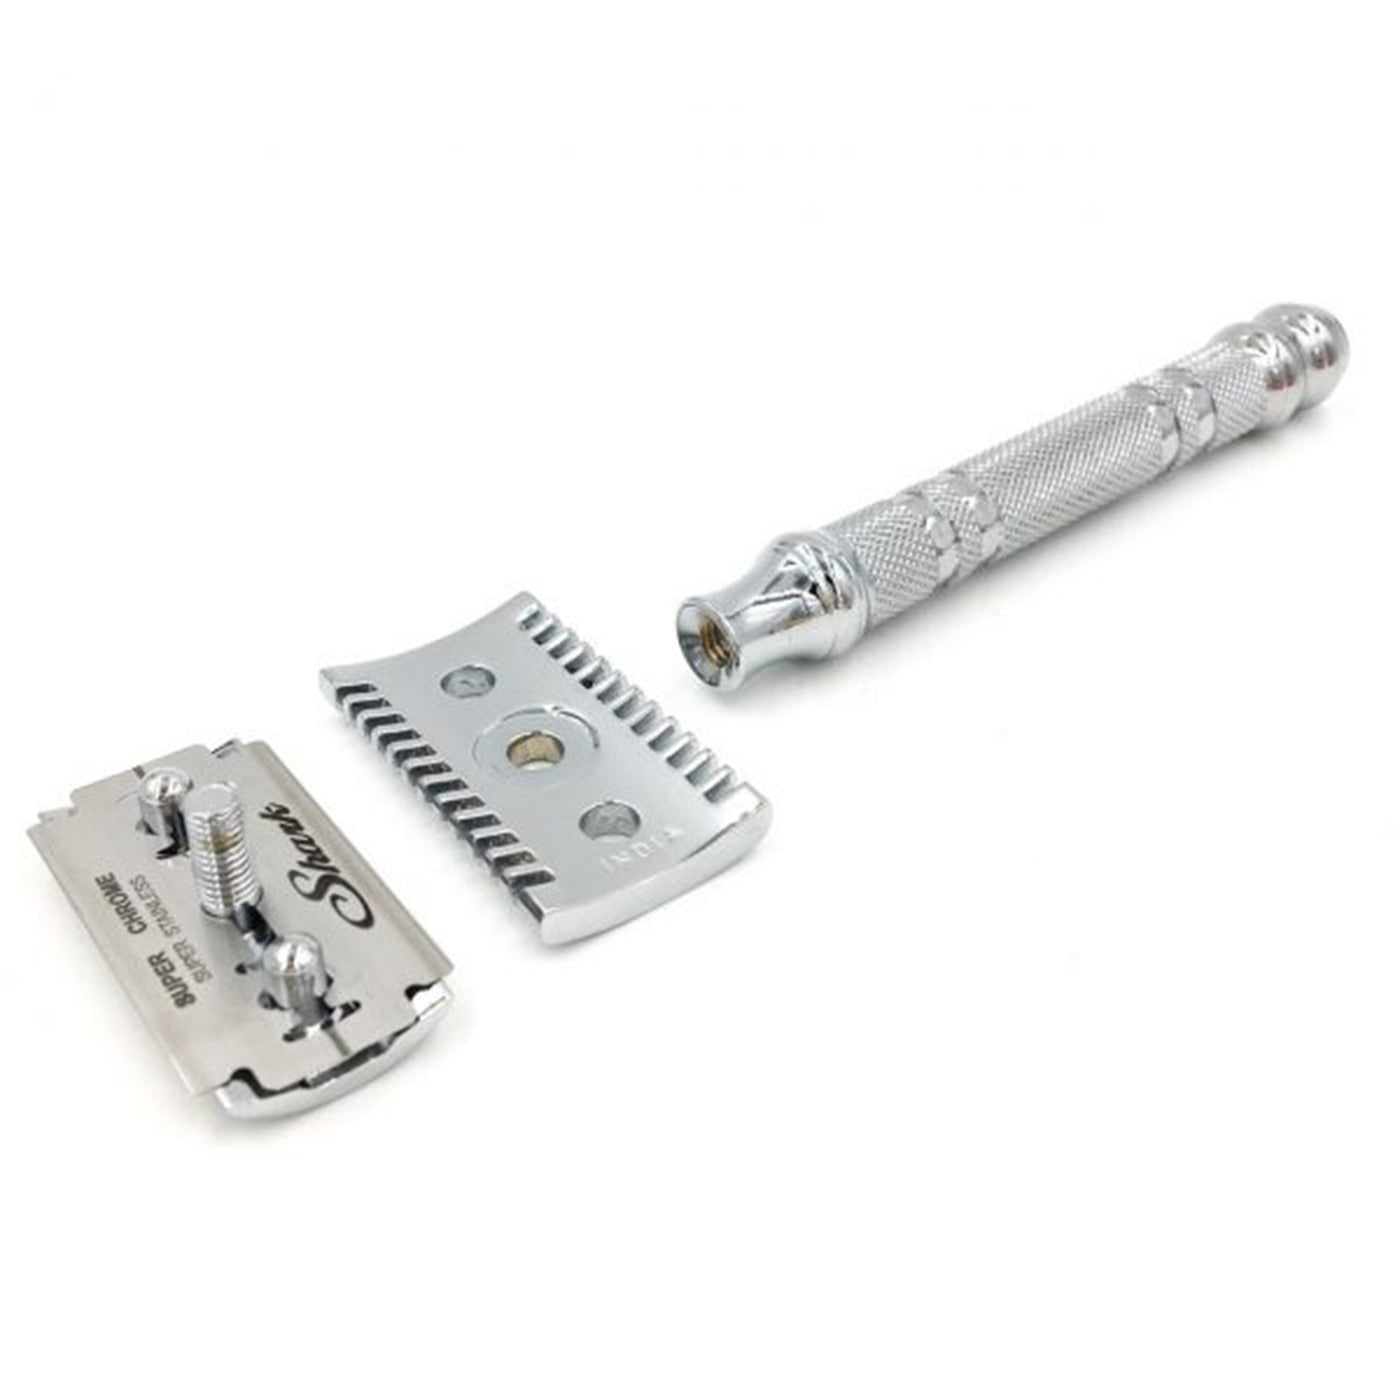  Parker 24C Open Comb Safety Razor by Parker sold by Naked Armor Razors